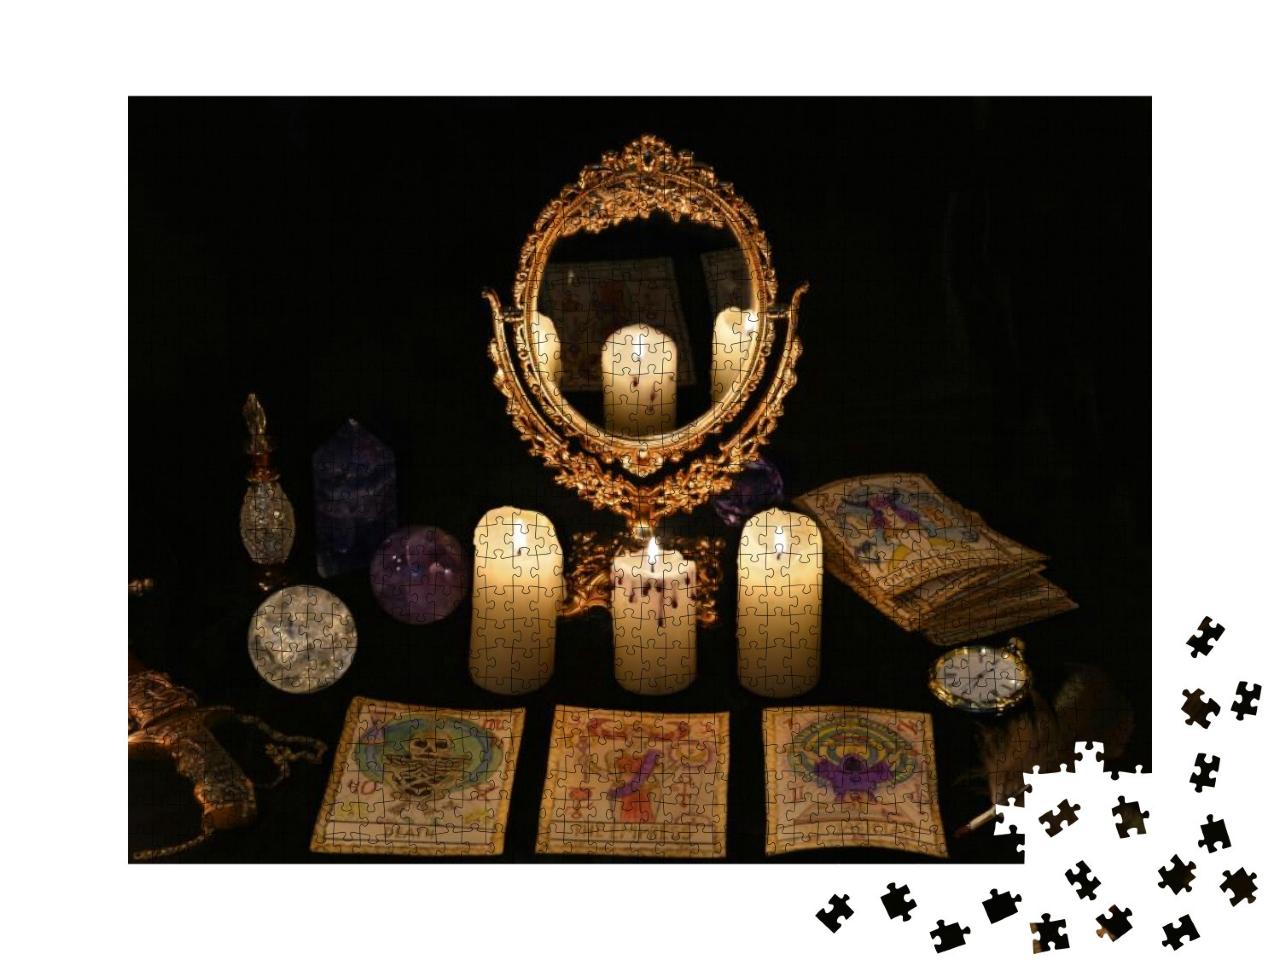 Fortune Telling Ritual with the Tarot Cards, Mirror... Jigsaw Puzzle with 1000 pieces